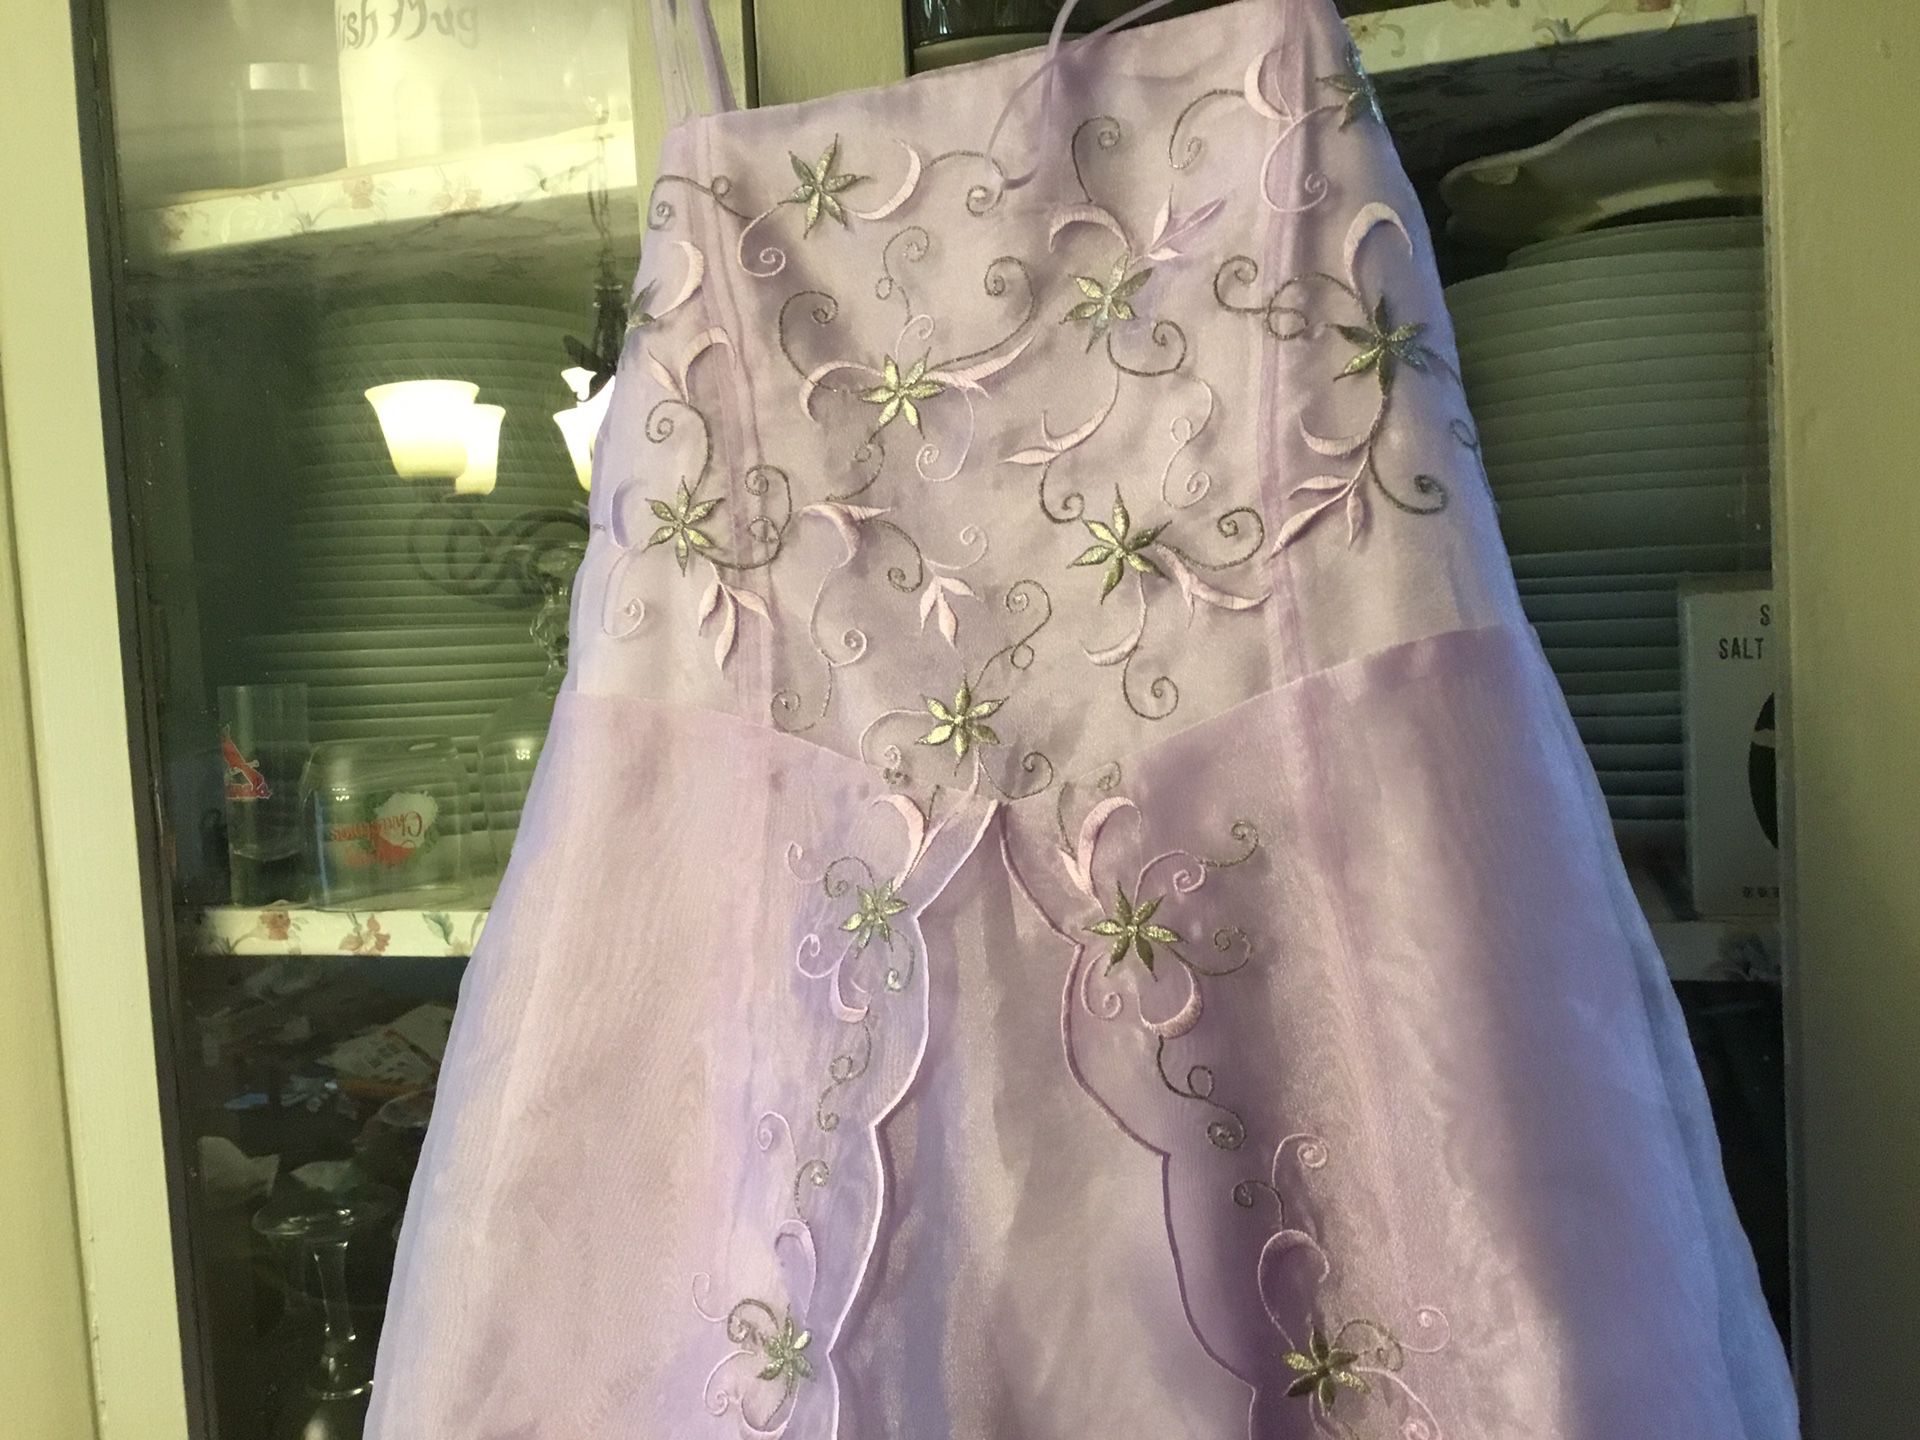 Girls size 14 Easter dresses 9$ each one lilac and one ivory